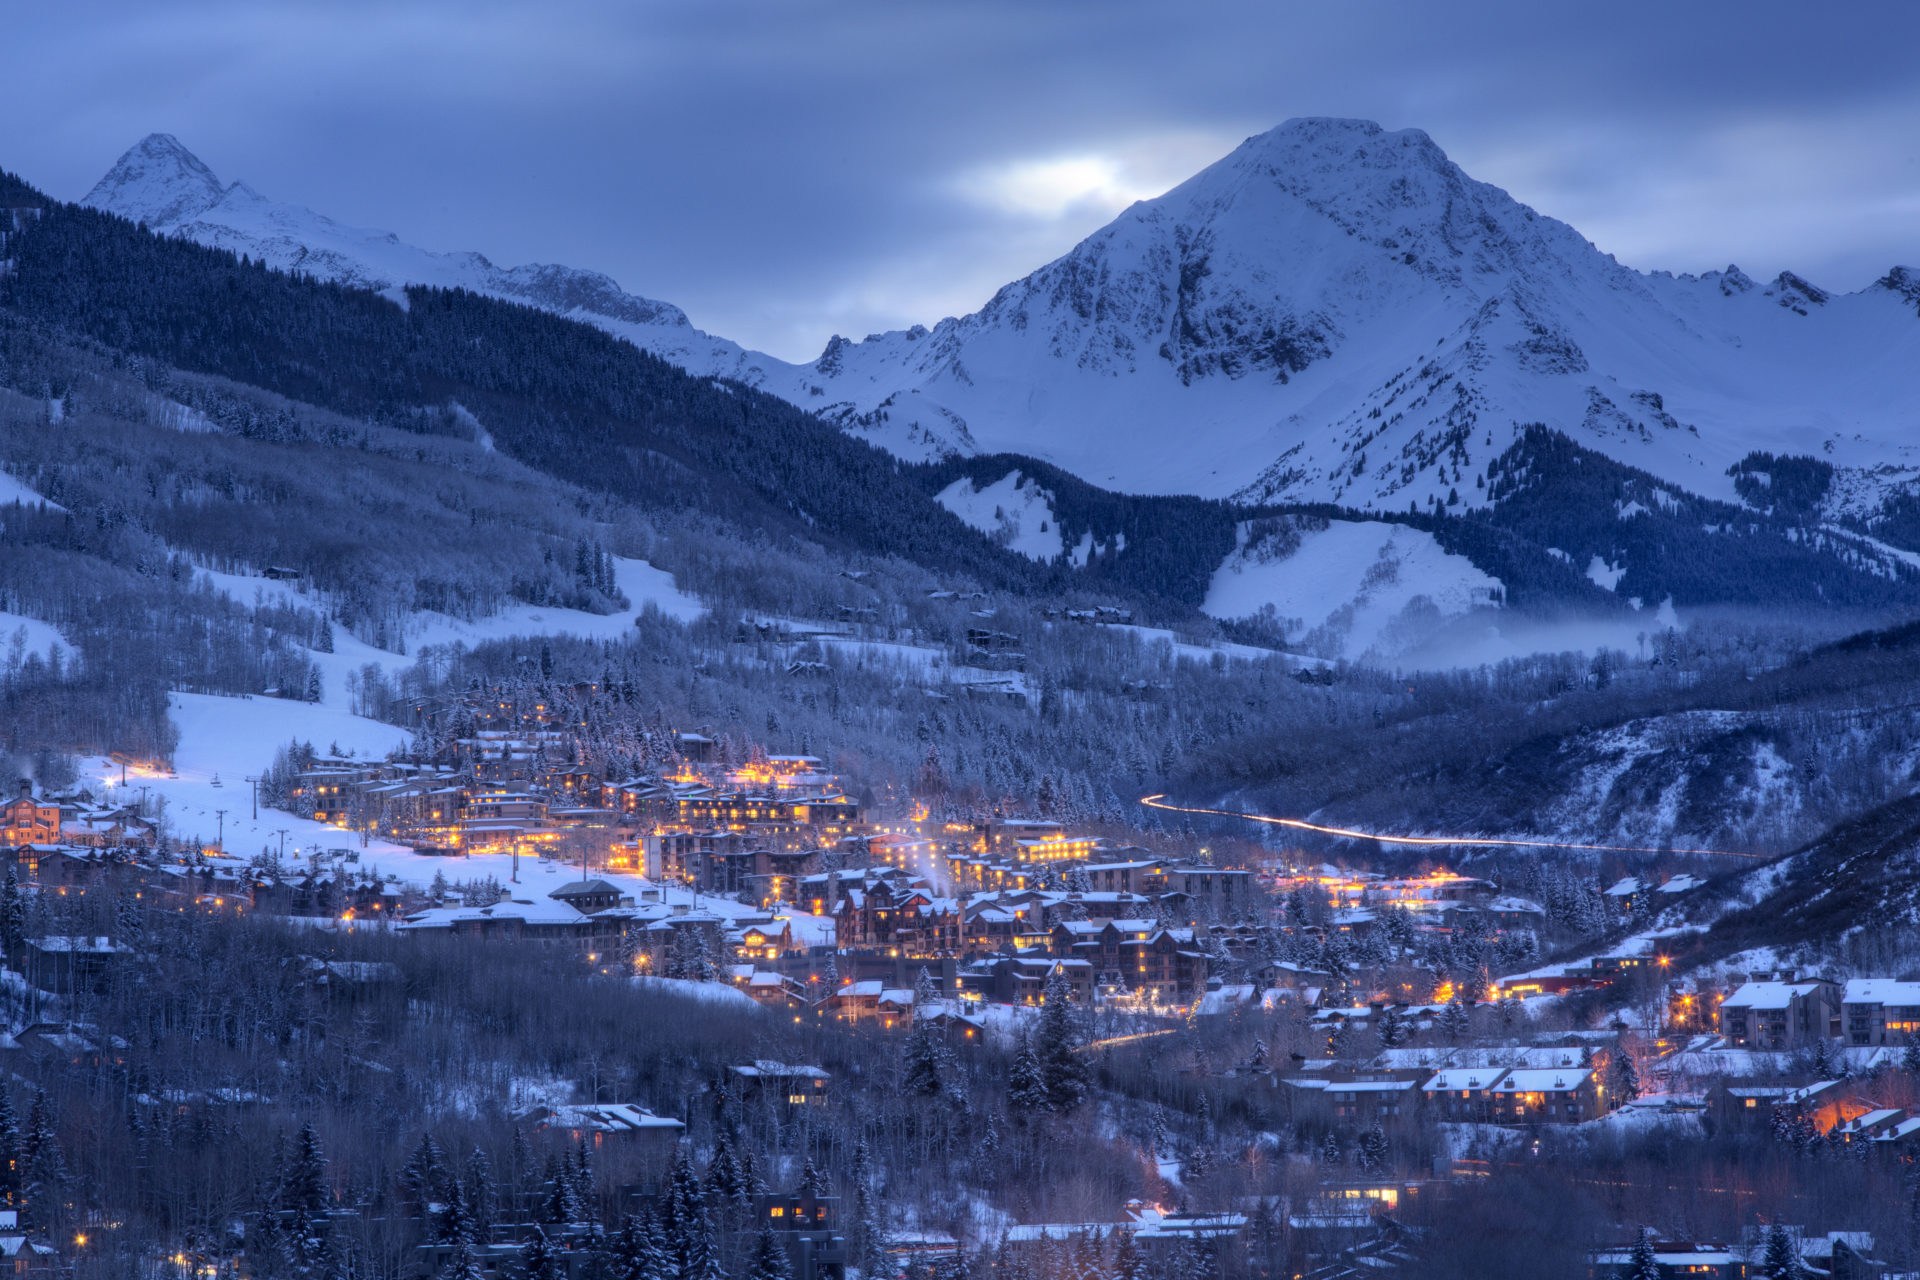 Hotels, Condos, Lodging and Vacation Rentals in Snowmass, Colorado